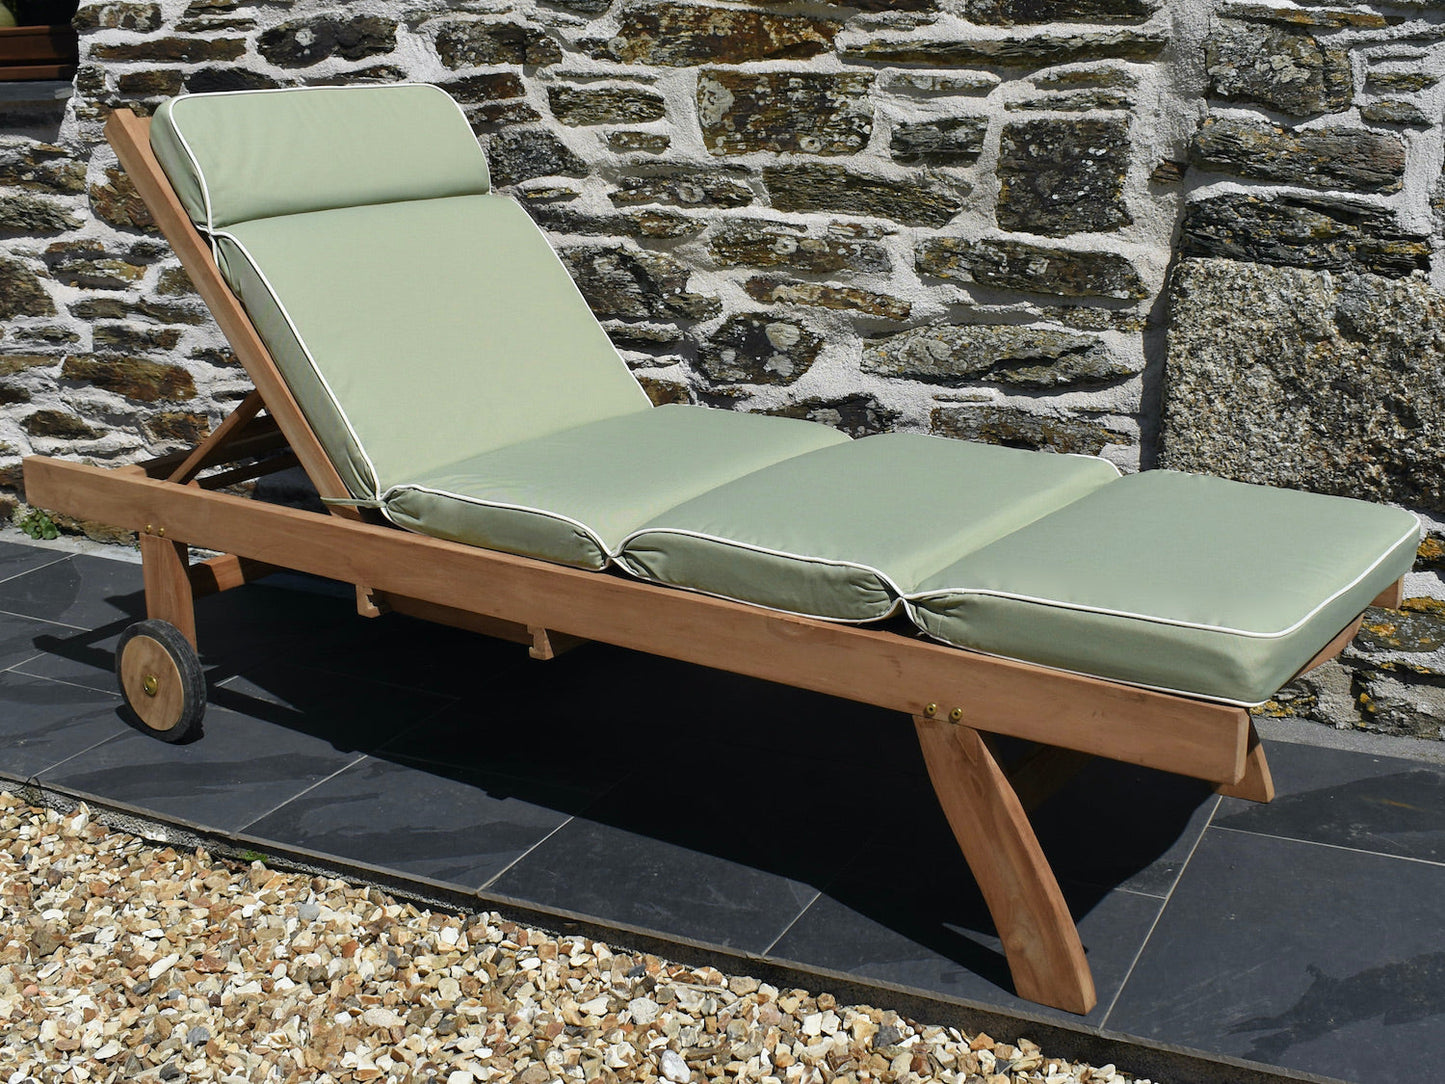 Luxury light olive green colour outdoor cushion for a traditional garden sun lounger cushion